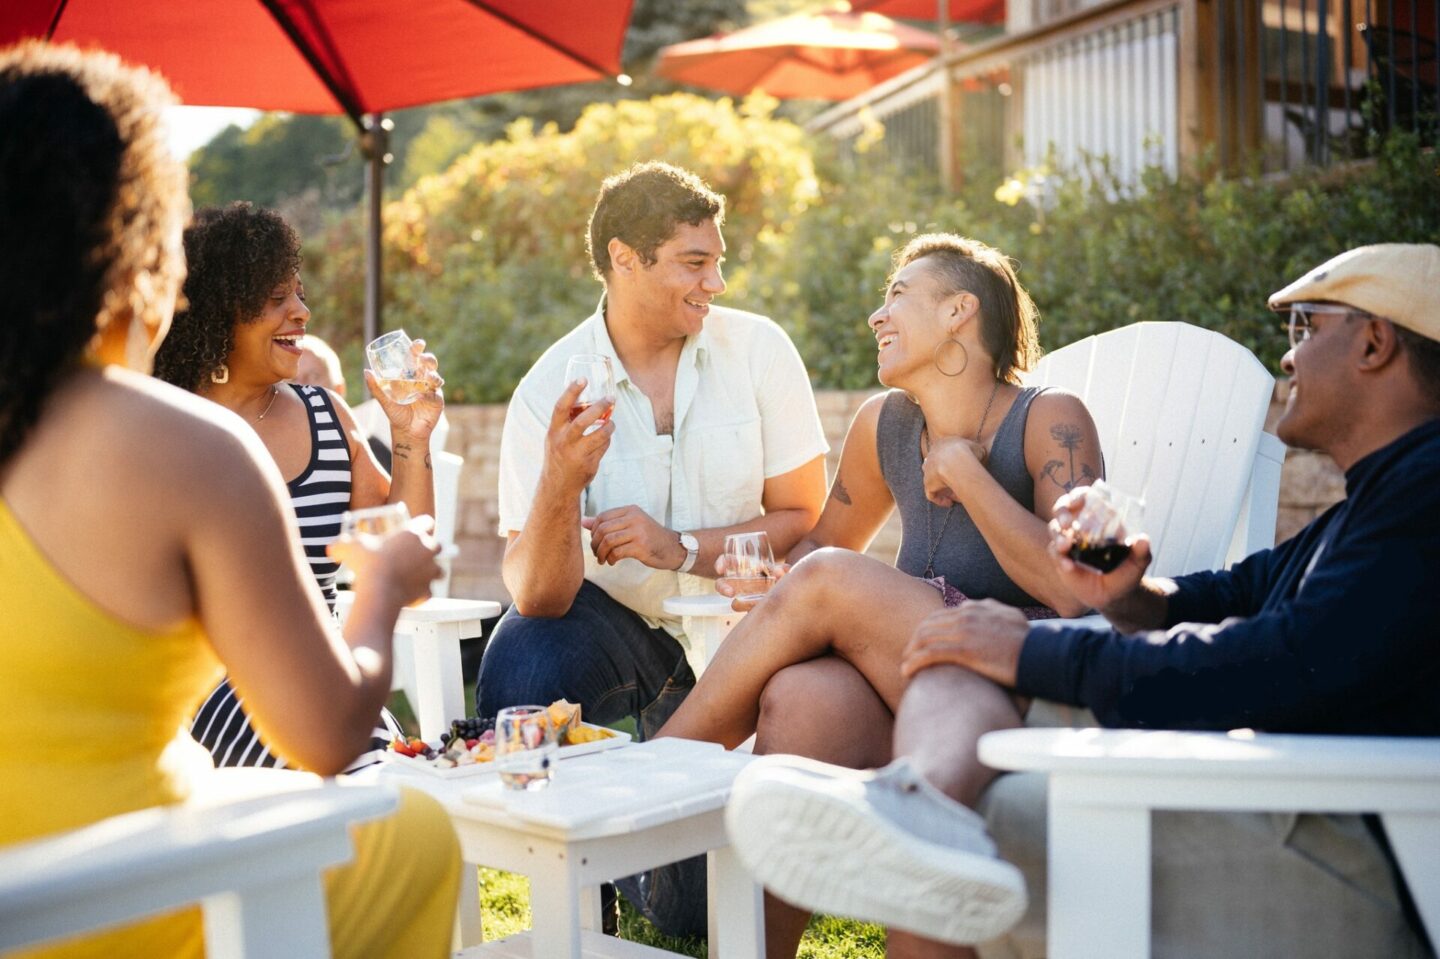 People enjoying a wine tasting on an outdoor patio